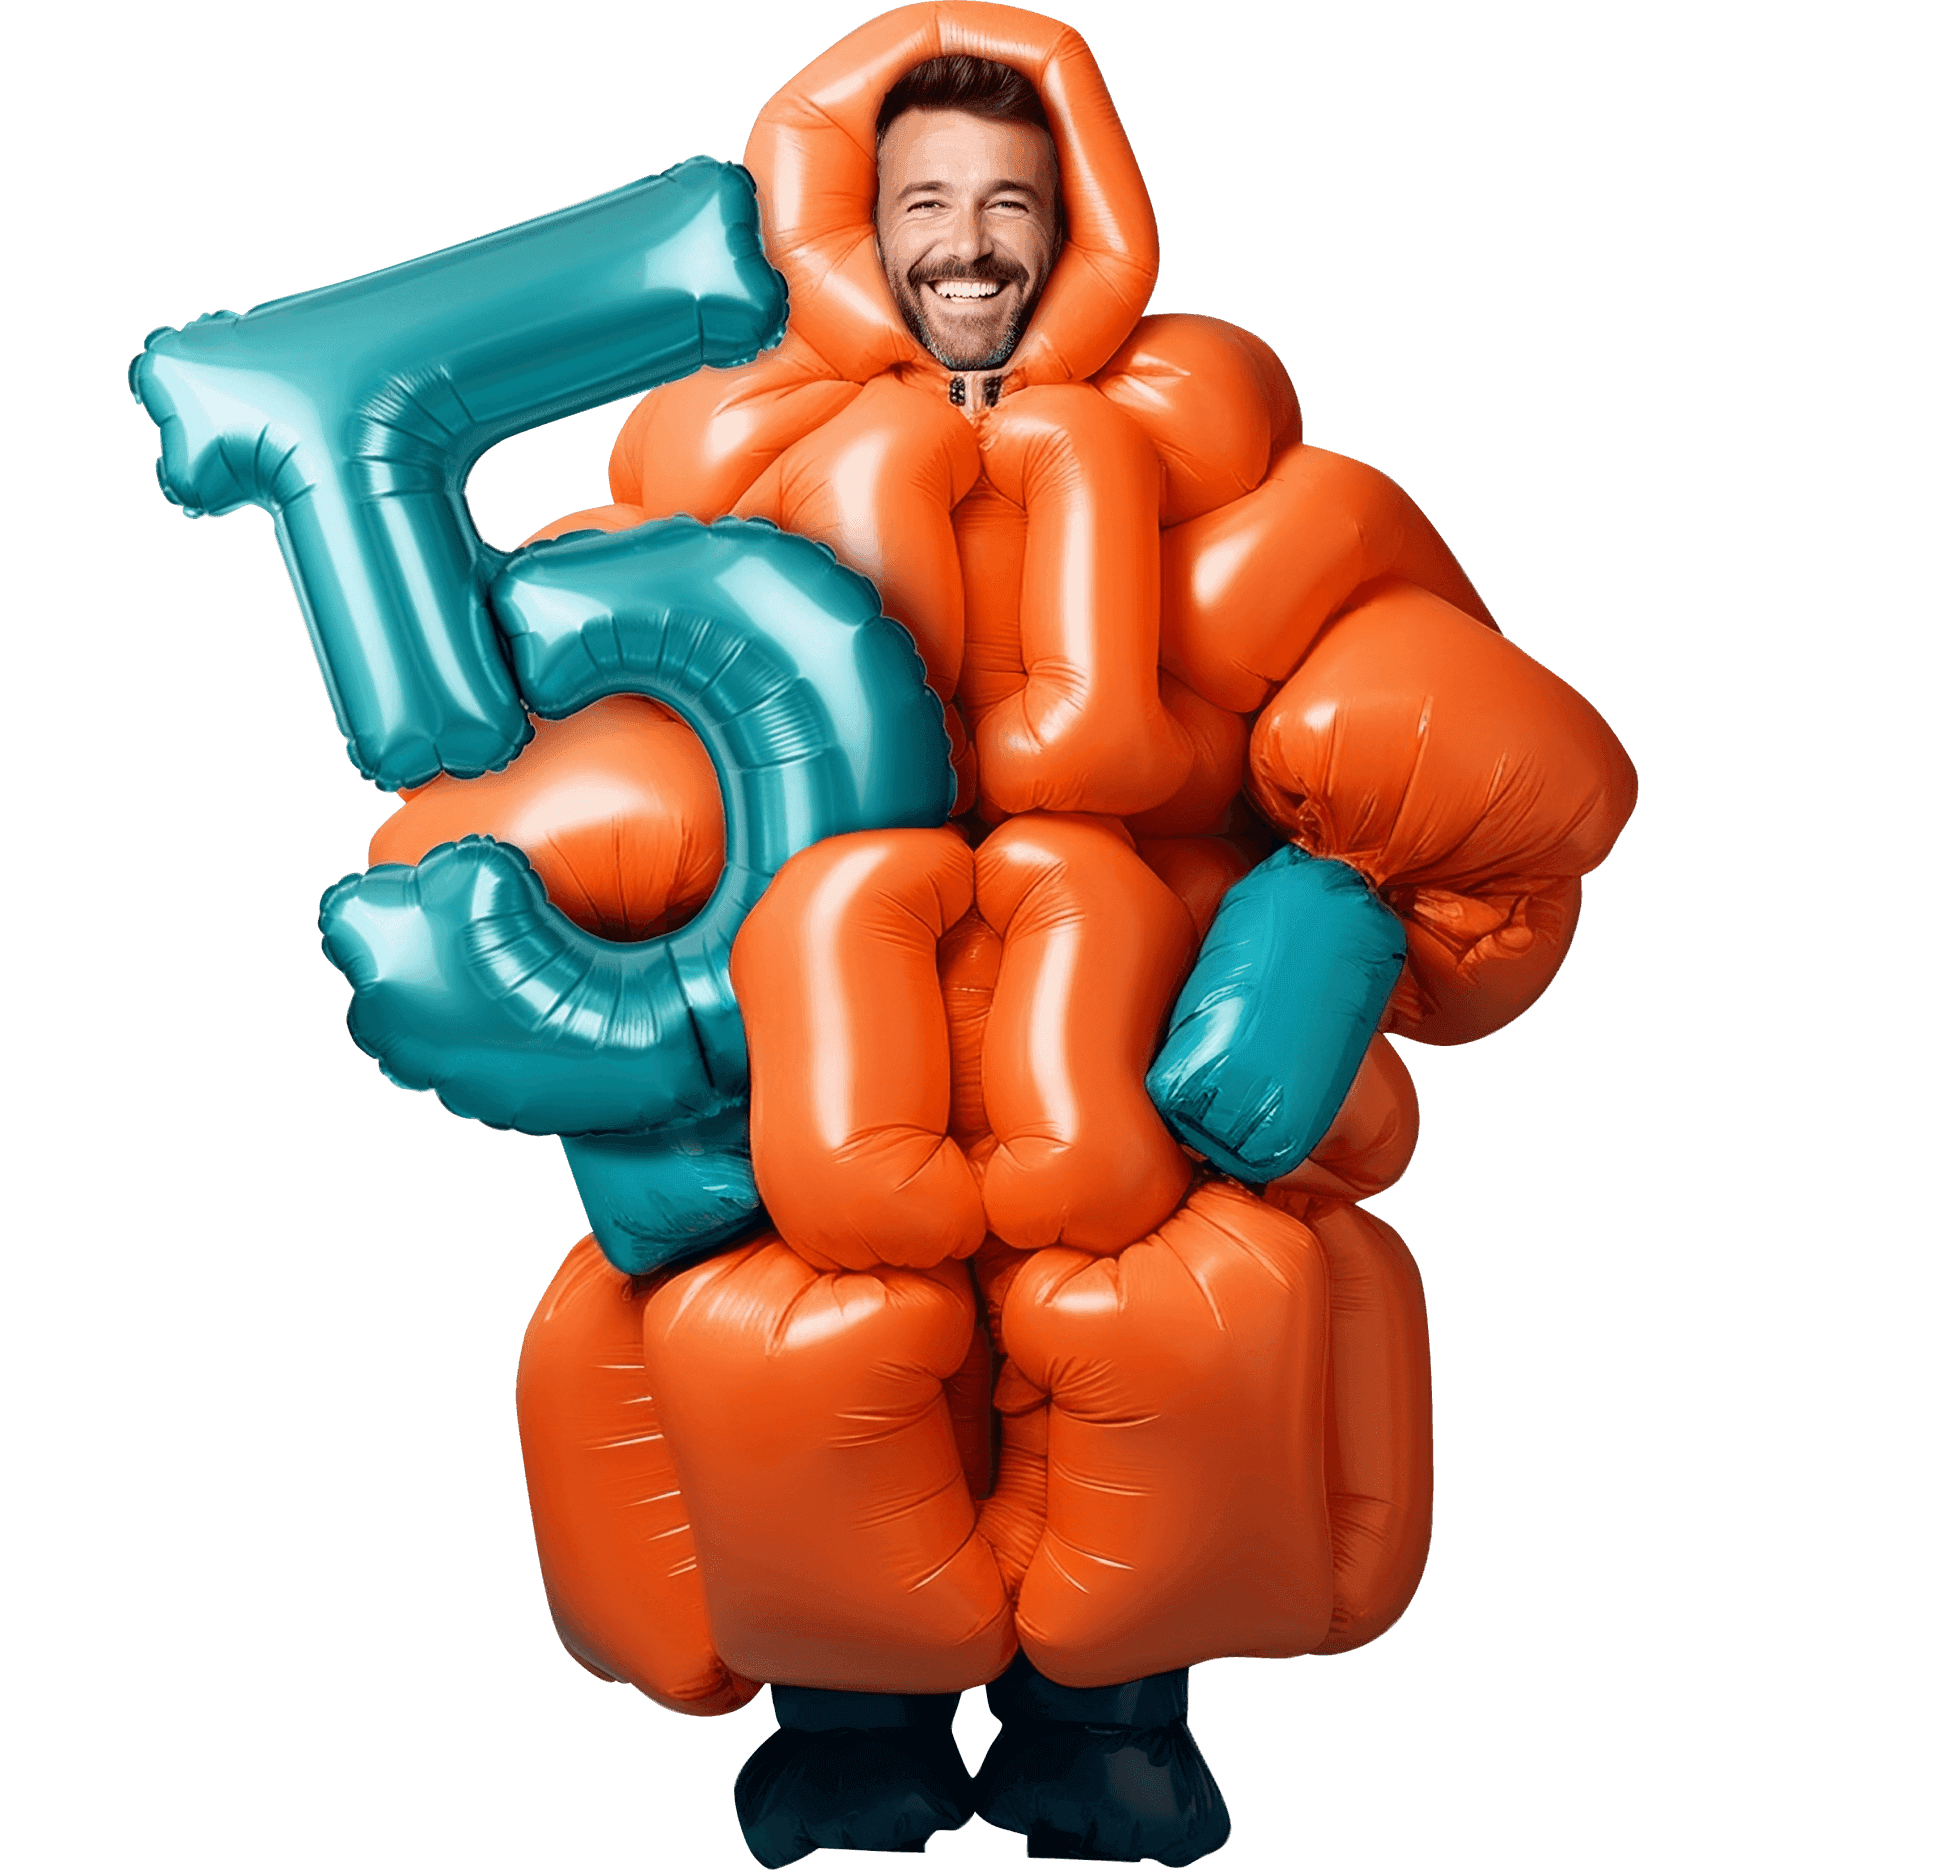 A man in an orange suit made of balloons holding a number 5 balloon with a Black Friday badge on his shoulder.